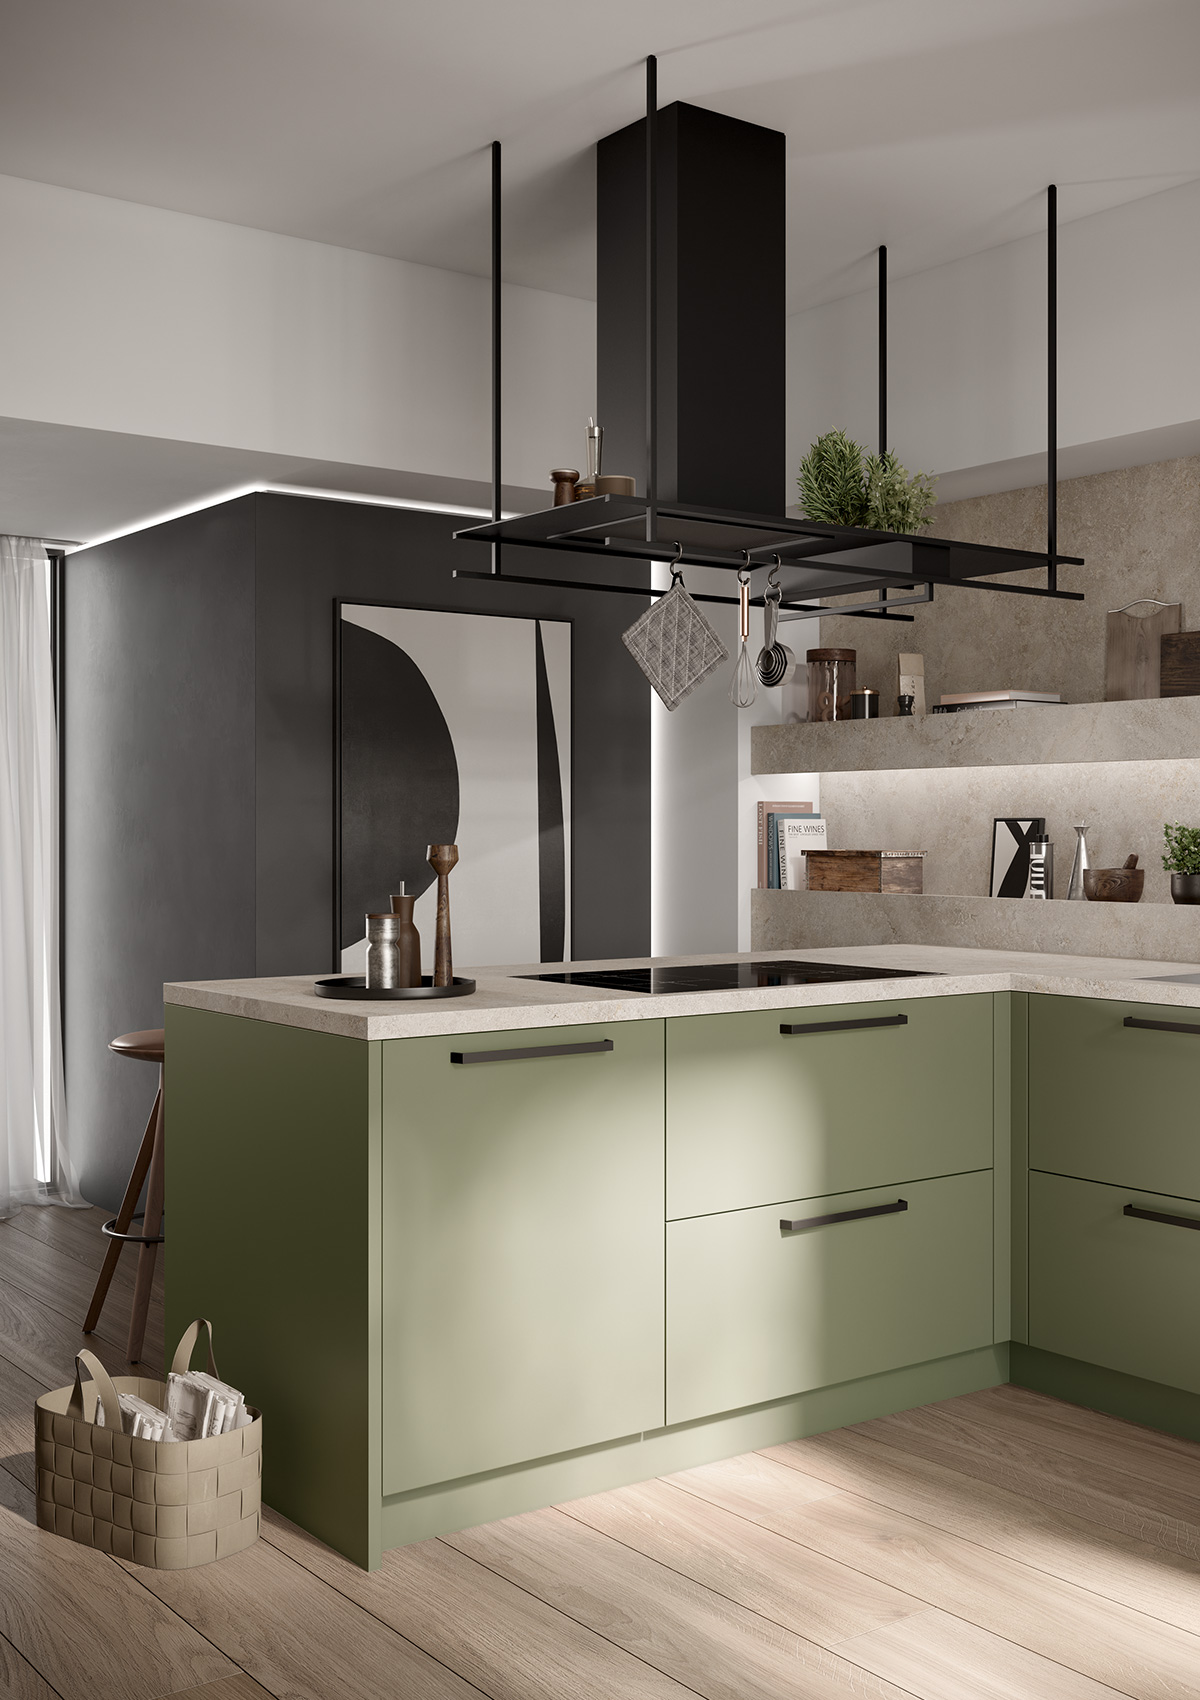 Picture of the kitchen counter of the concept130 Scala Olive Green, above it black extractor bonnet, in the foreground round dining table with chairs.